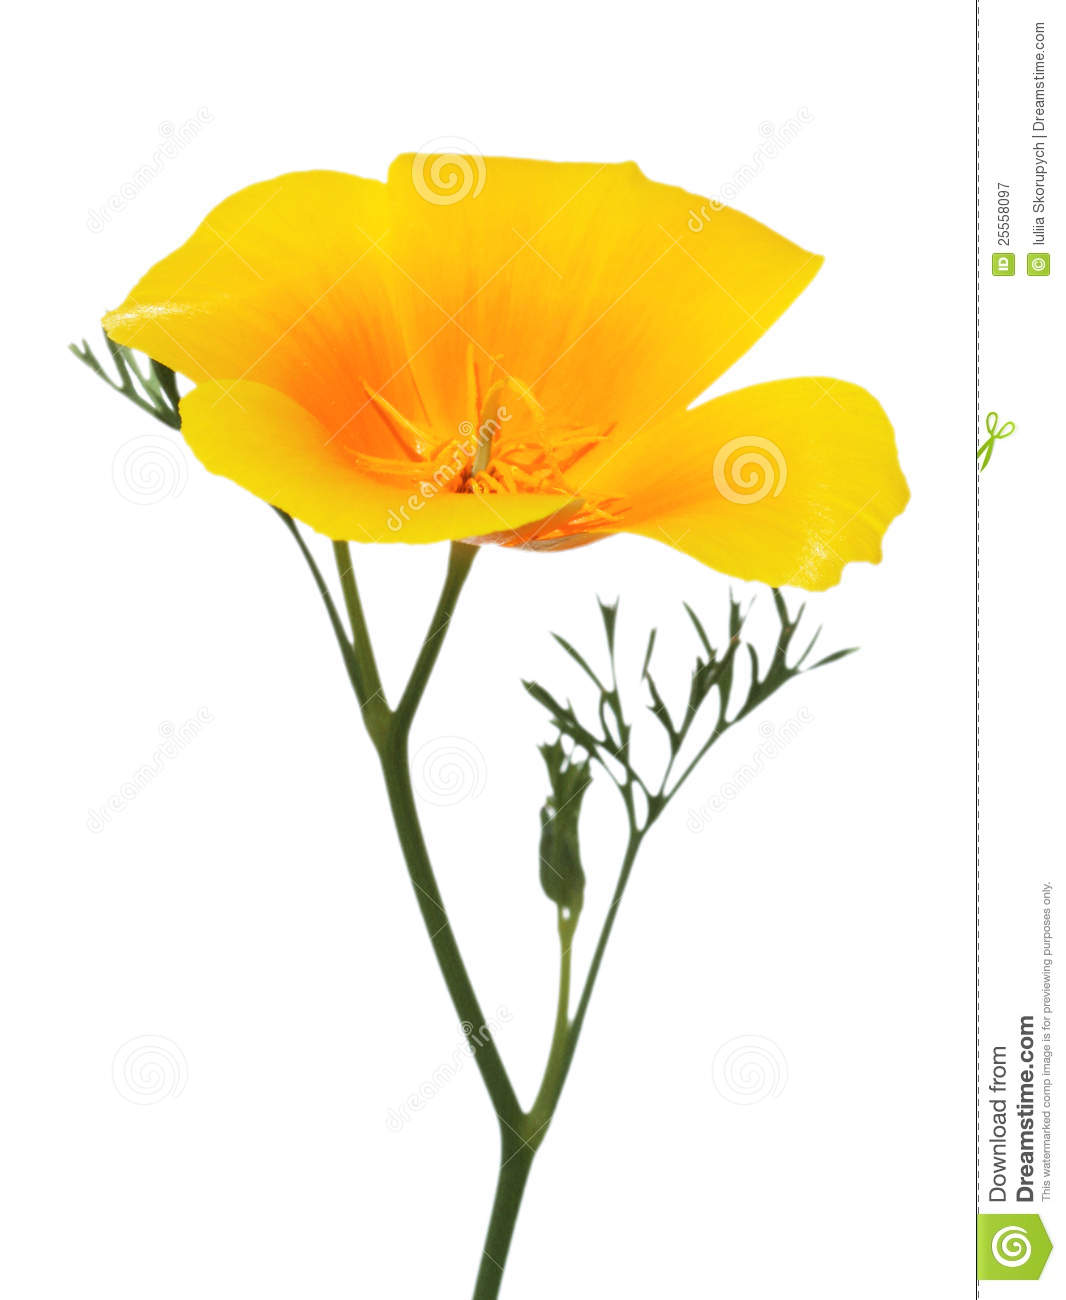 California poppies clipart 20 free Cliparts | Download images on